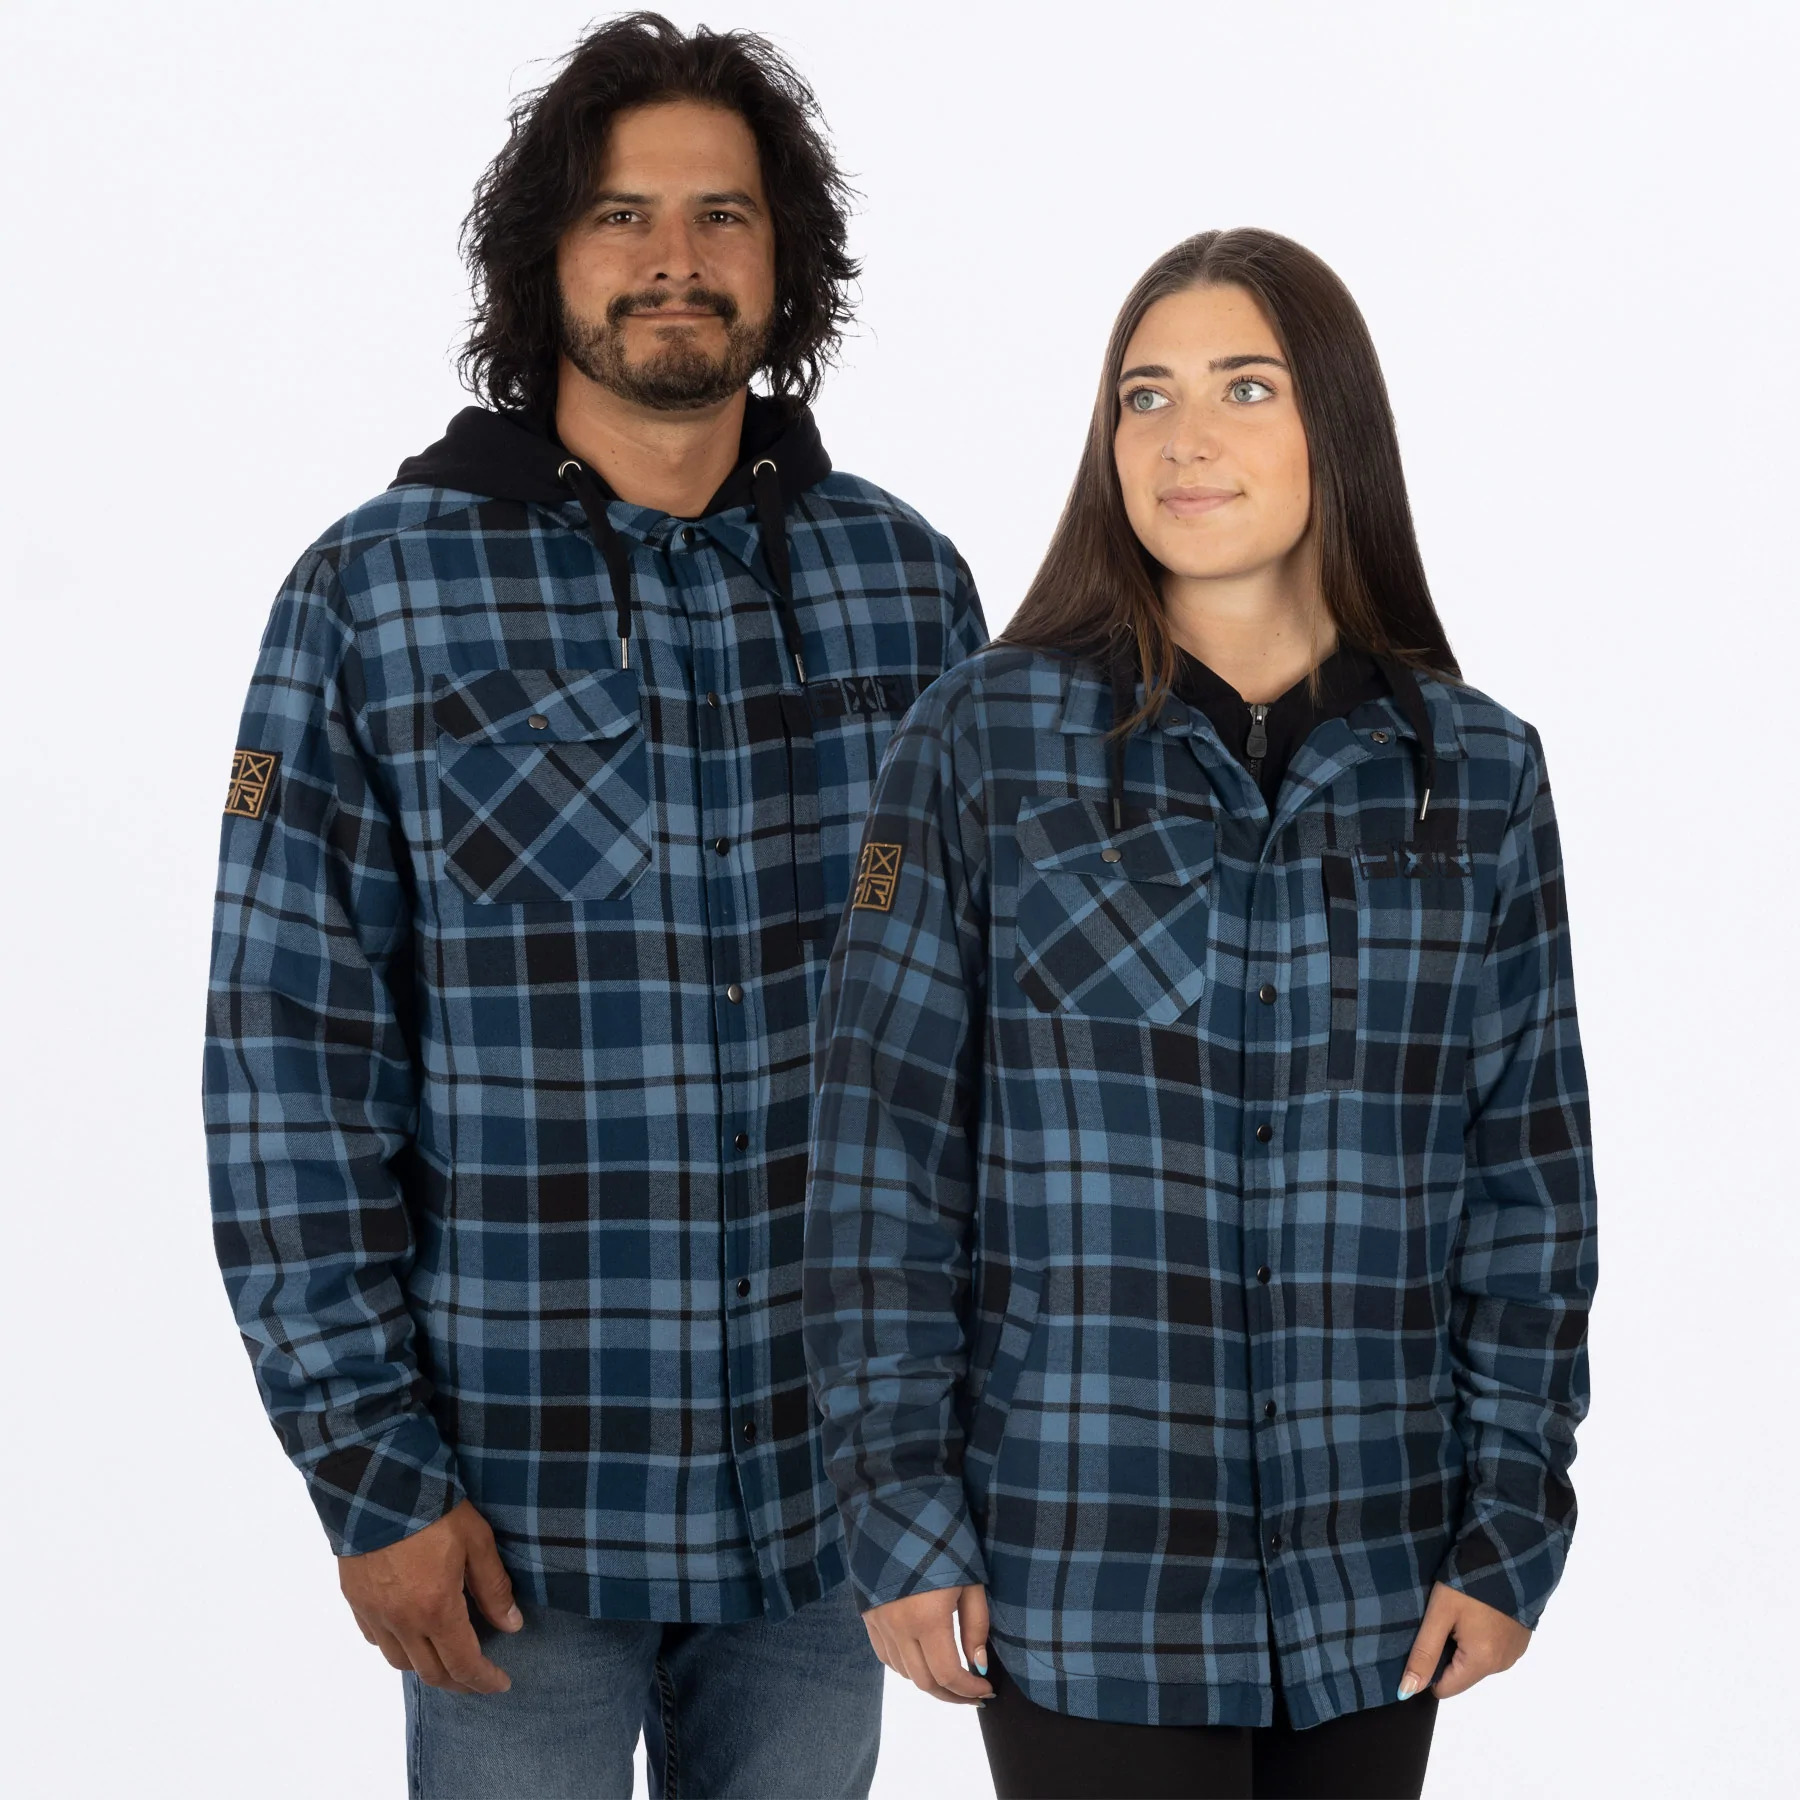 fxr racing jackets adult unisex timber insulated flannel jackets - casual